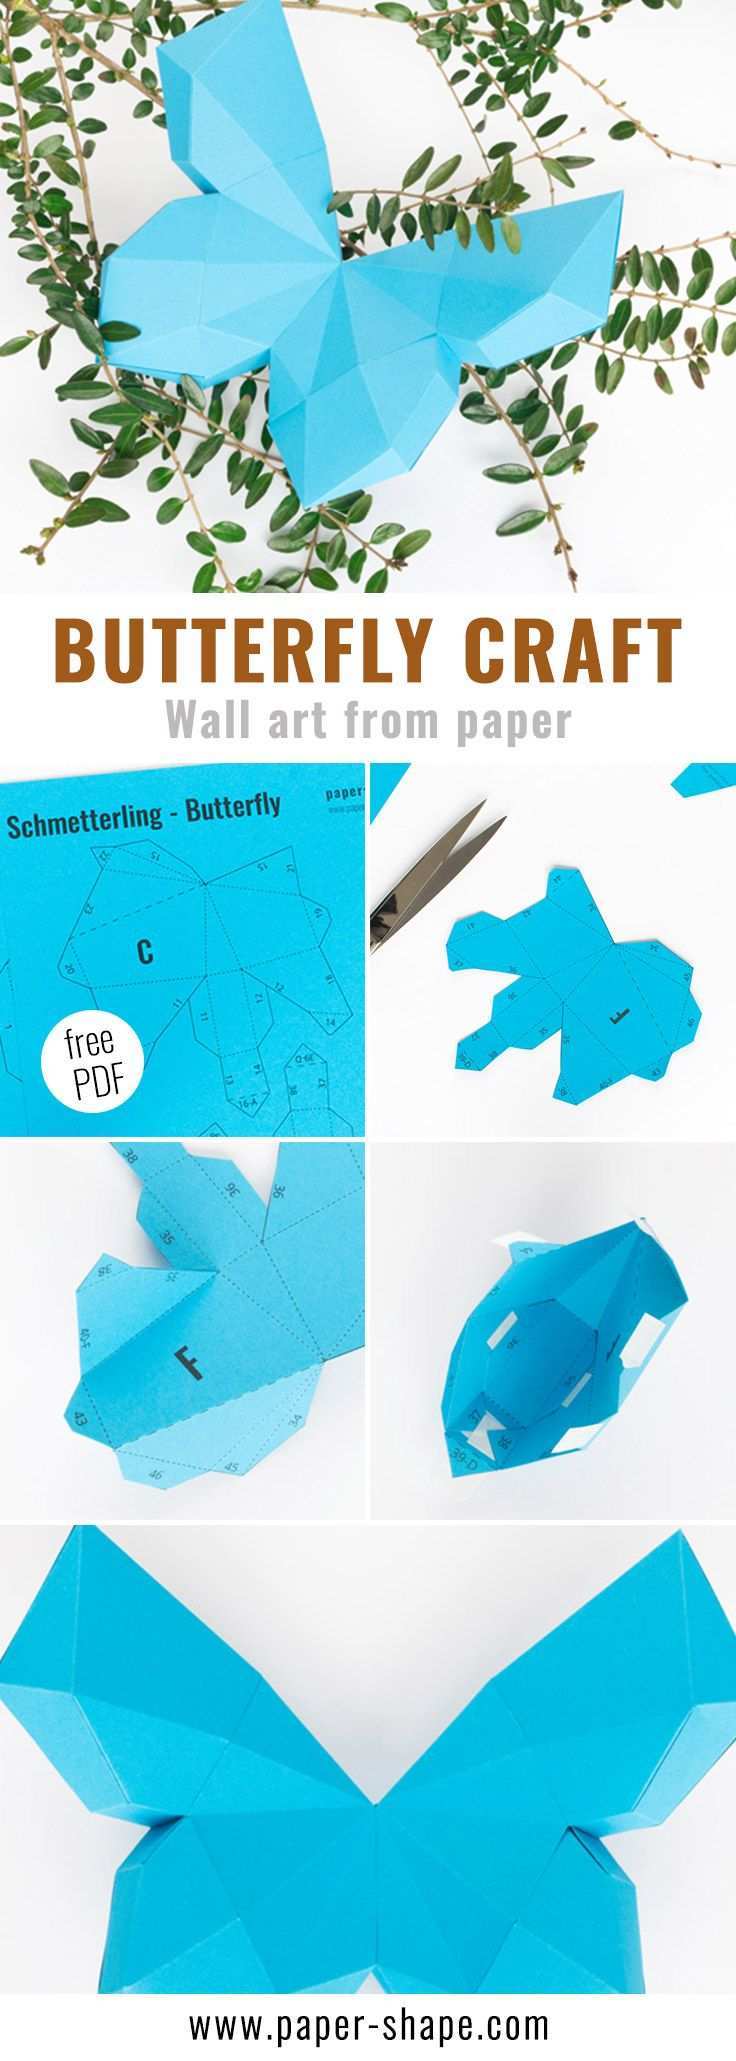 How To Make A 3d Butterfly From Paper With Template Handmade Paper Crafts Quilled Paper Art Paper Butterfly